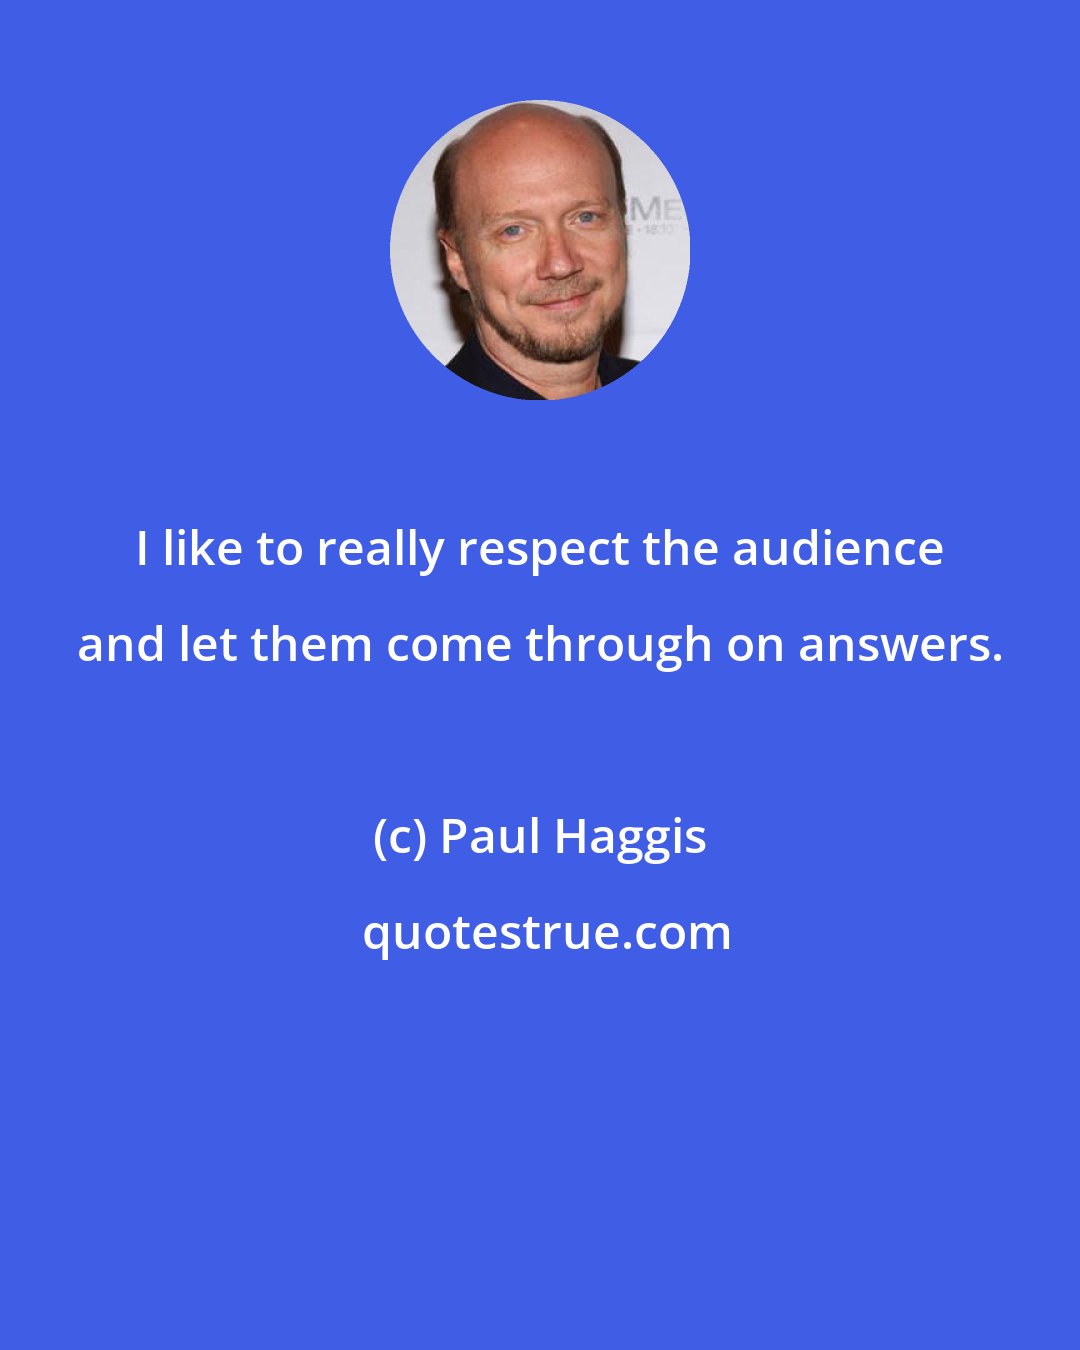 Paul Haggis: I like to really respect the audience and let them come through on answers.